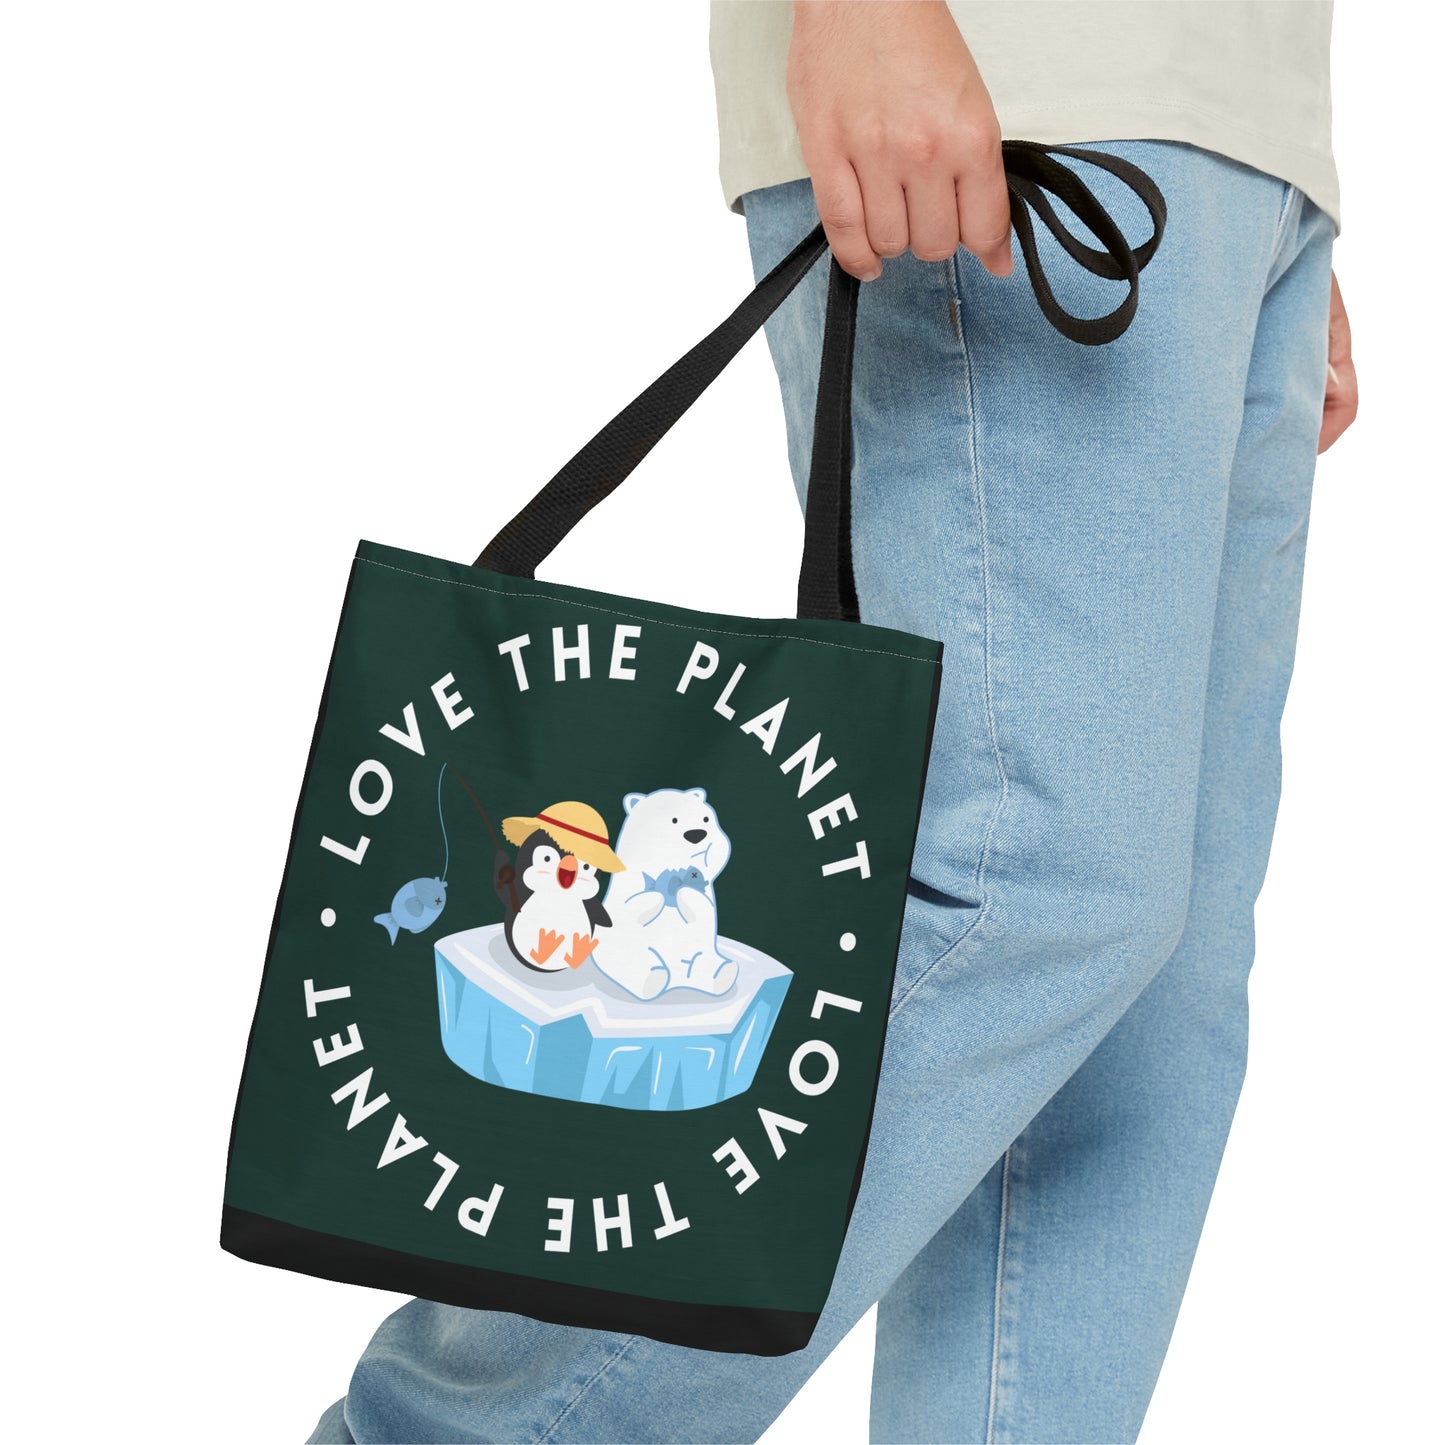 Cute polar bear, penguin and fish inside a  “LOVE THE PLANET” Tote Bag in 3 sizes to meet your needs.